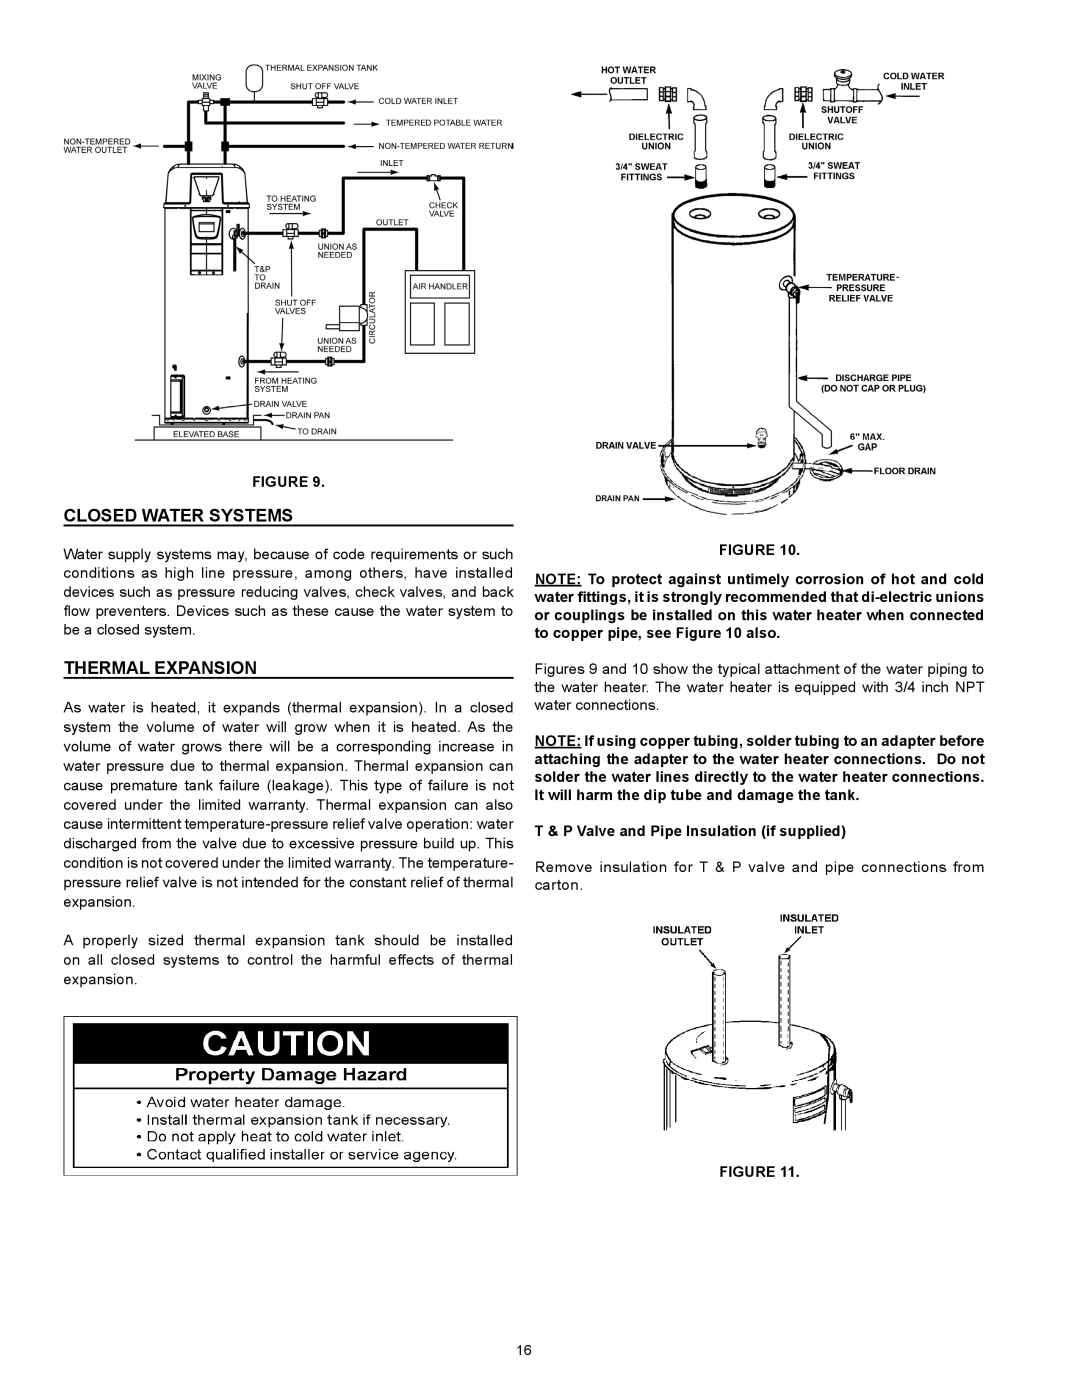 American Water Heater VG6250T100 Closed Water Systems, Thermal Expansion, T & P Valve and Pipe Insulation if supplied 